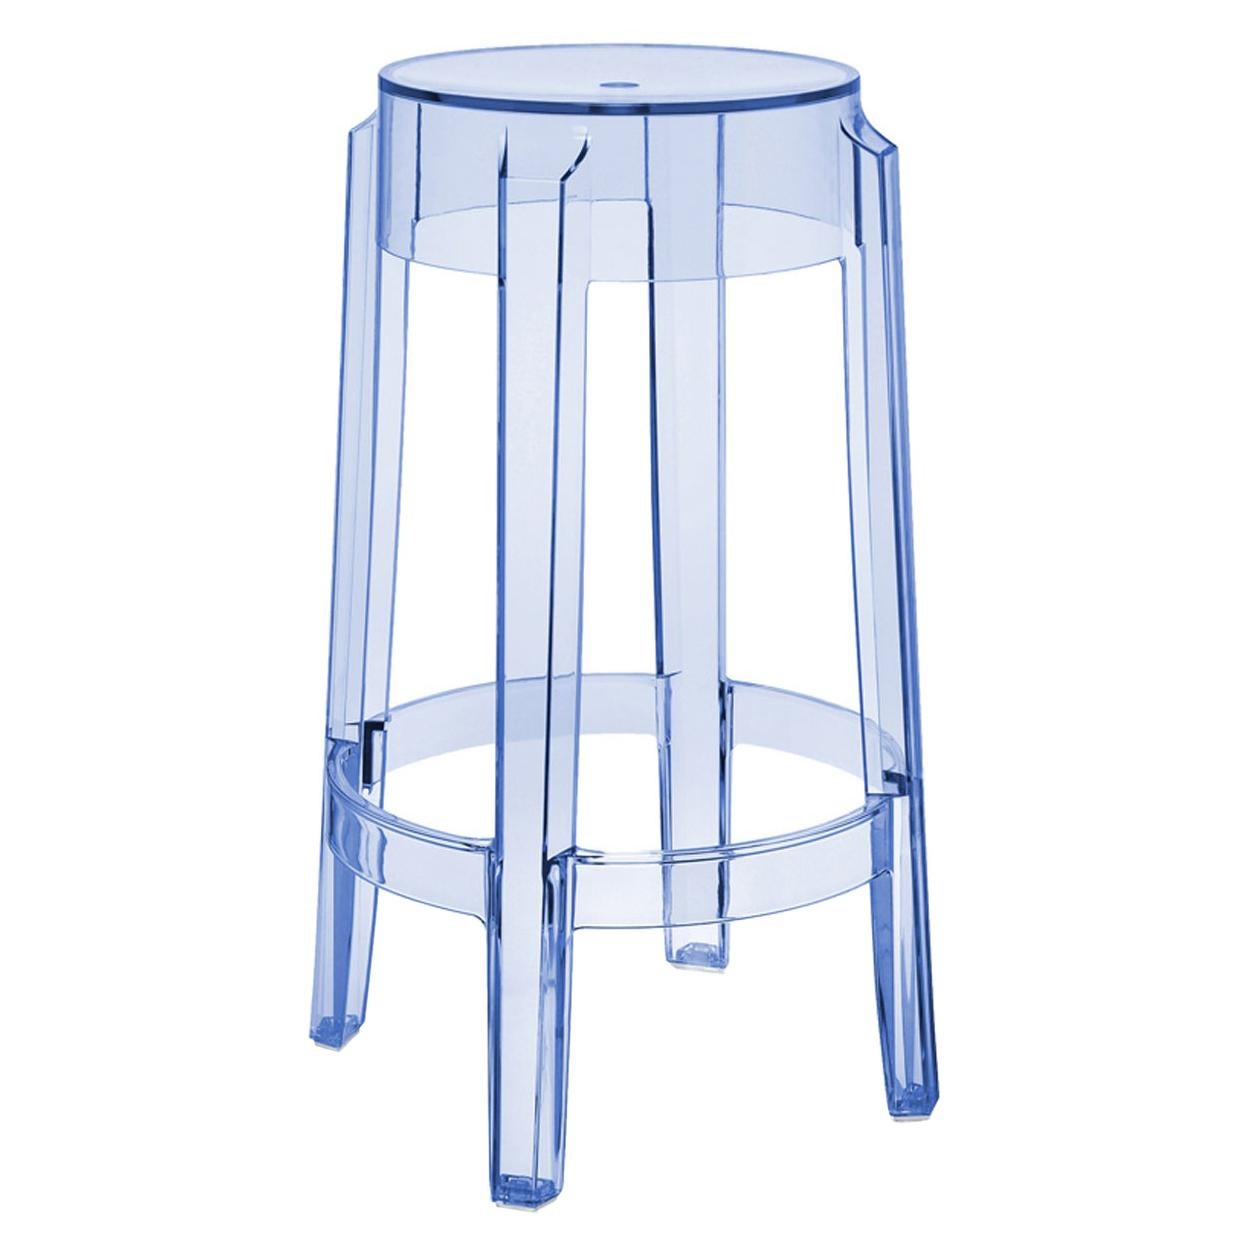 Set of 2 Kartell Charles Ghost Medium Stools in Powder Blue by Philippe Starck